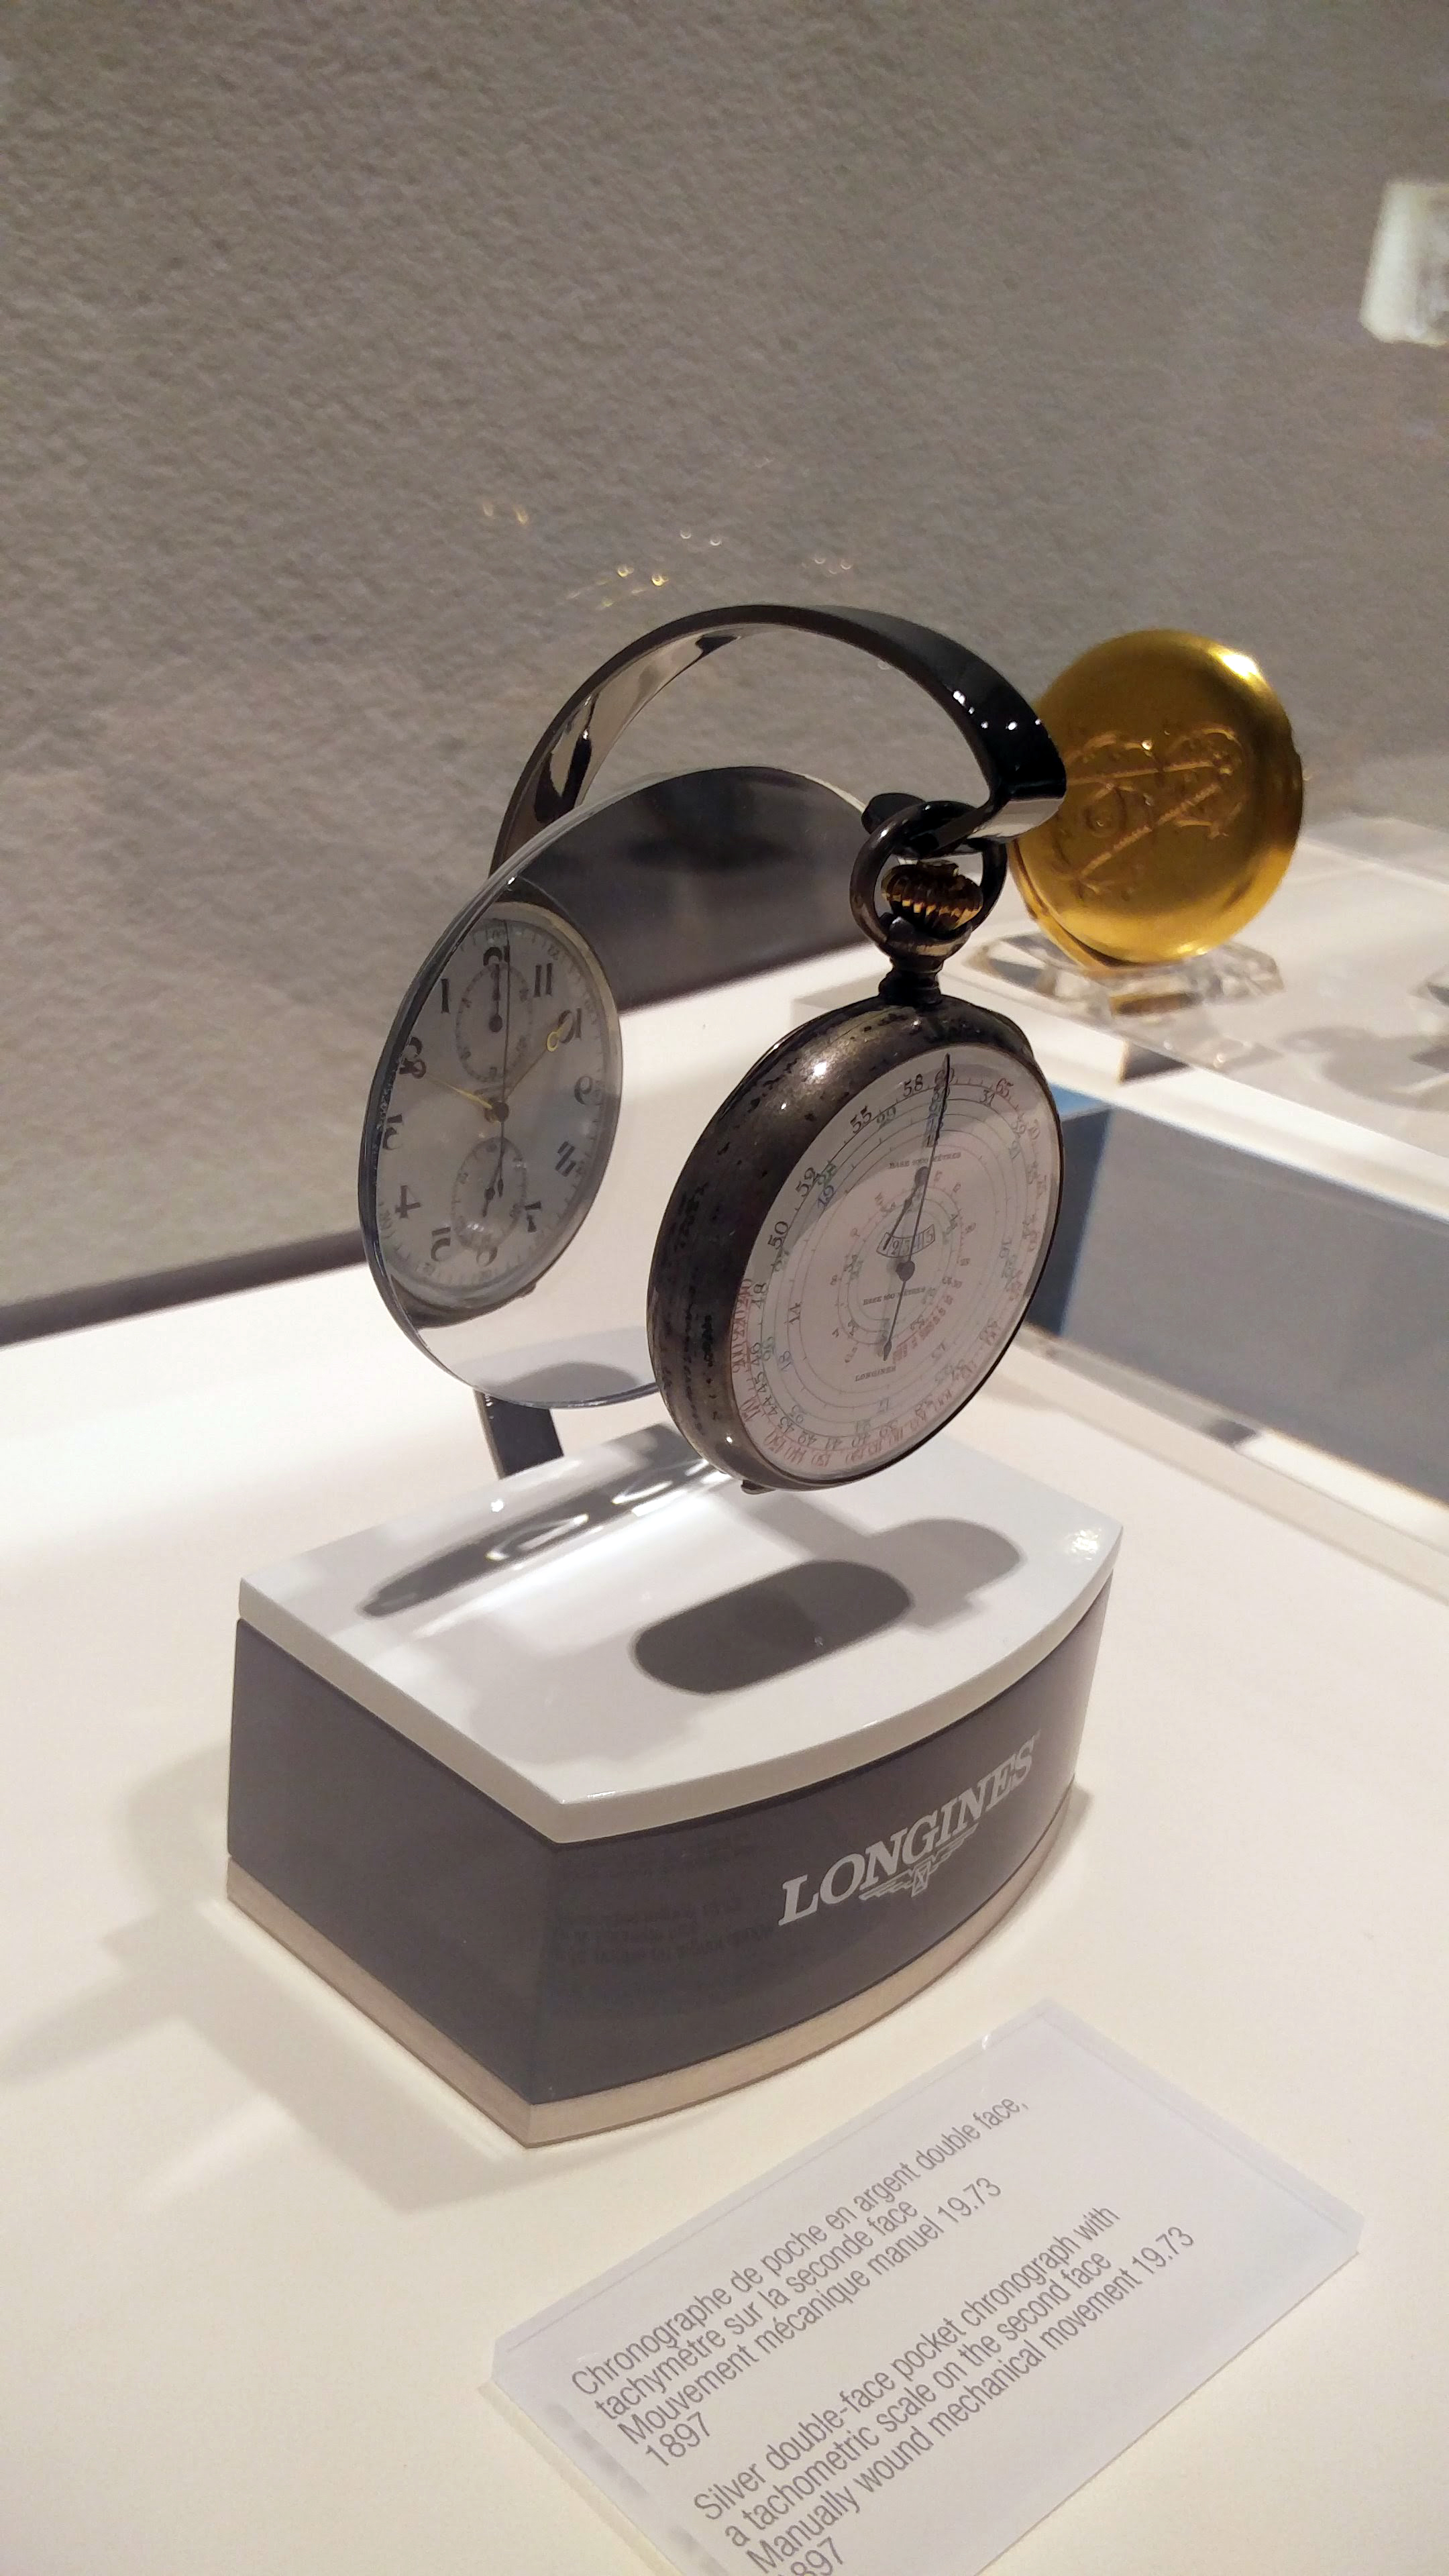 Silver double-face pocket watch chronograph, with a tachometric scale on the second face. 